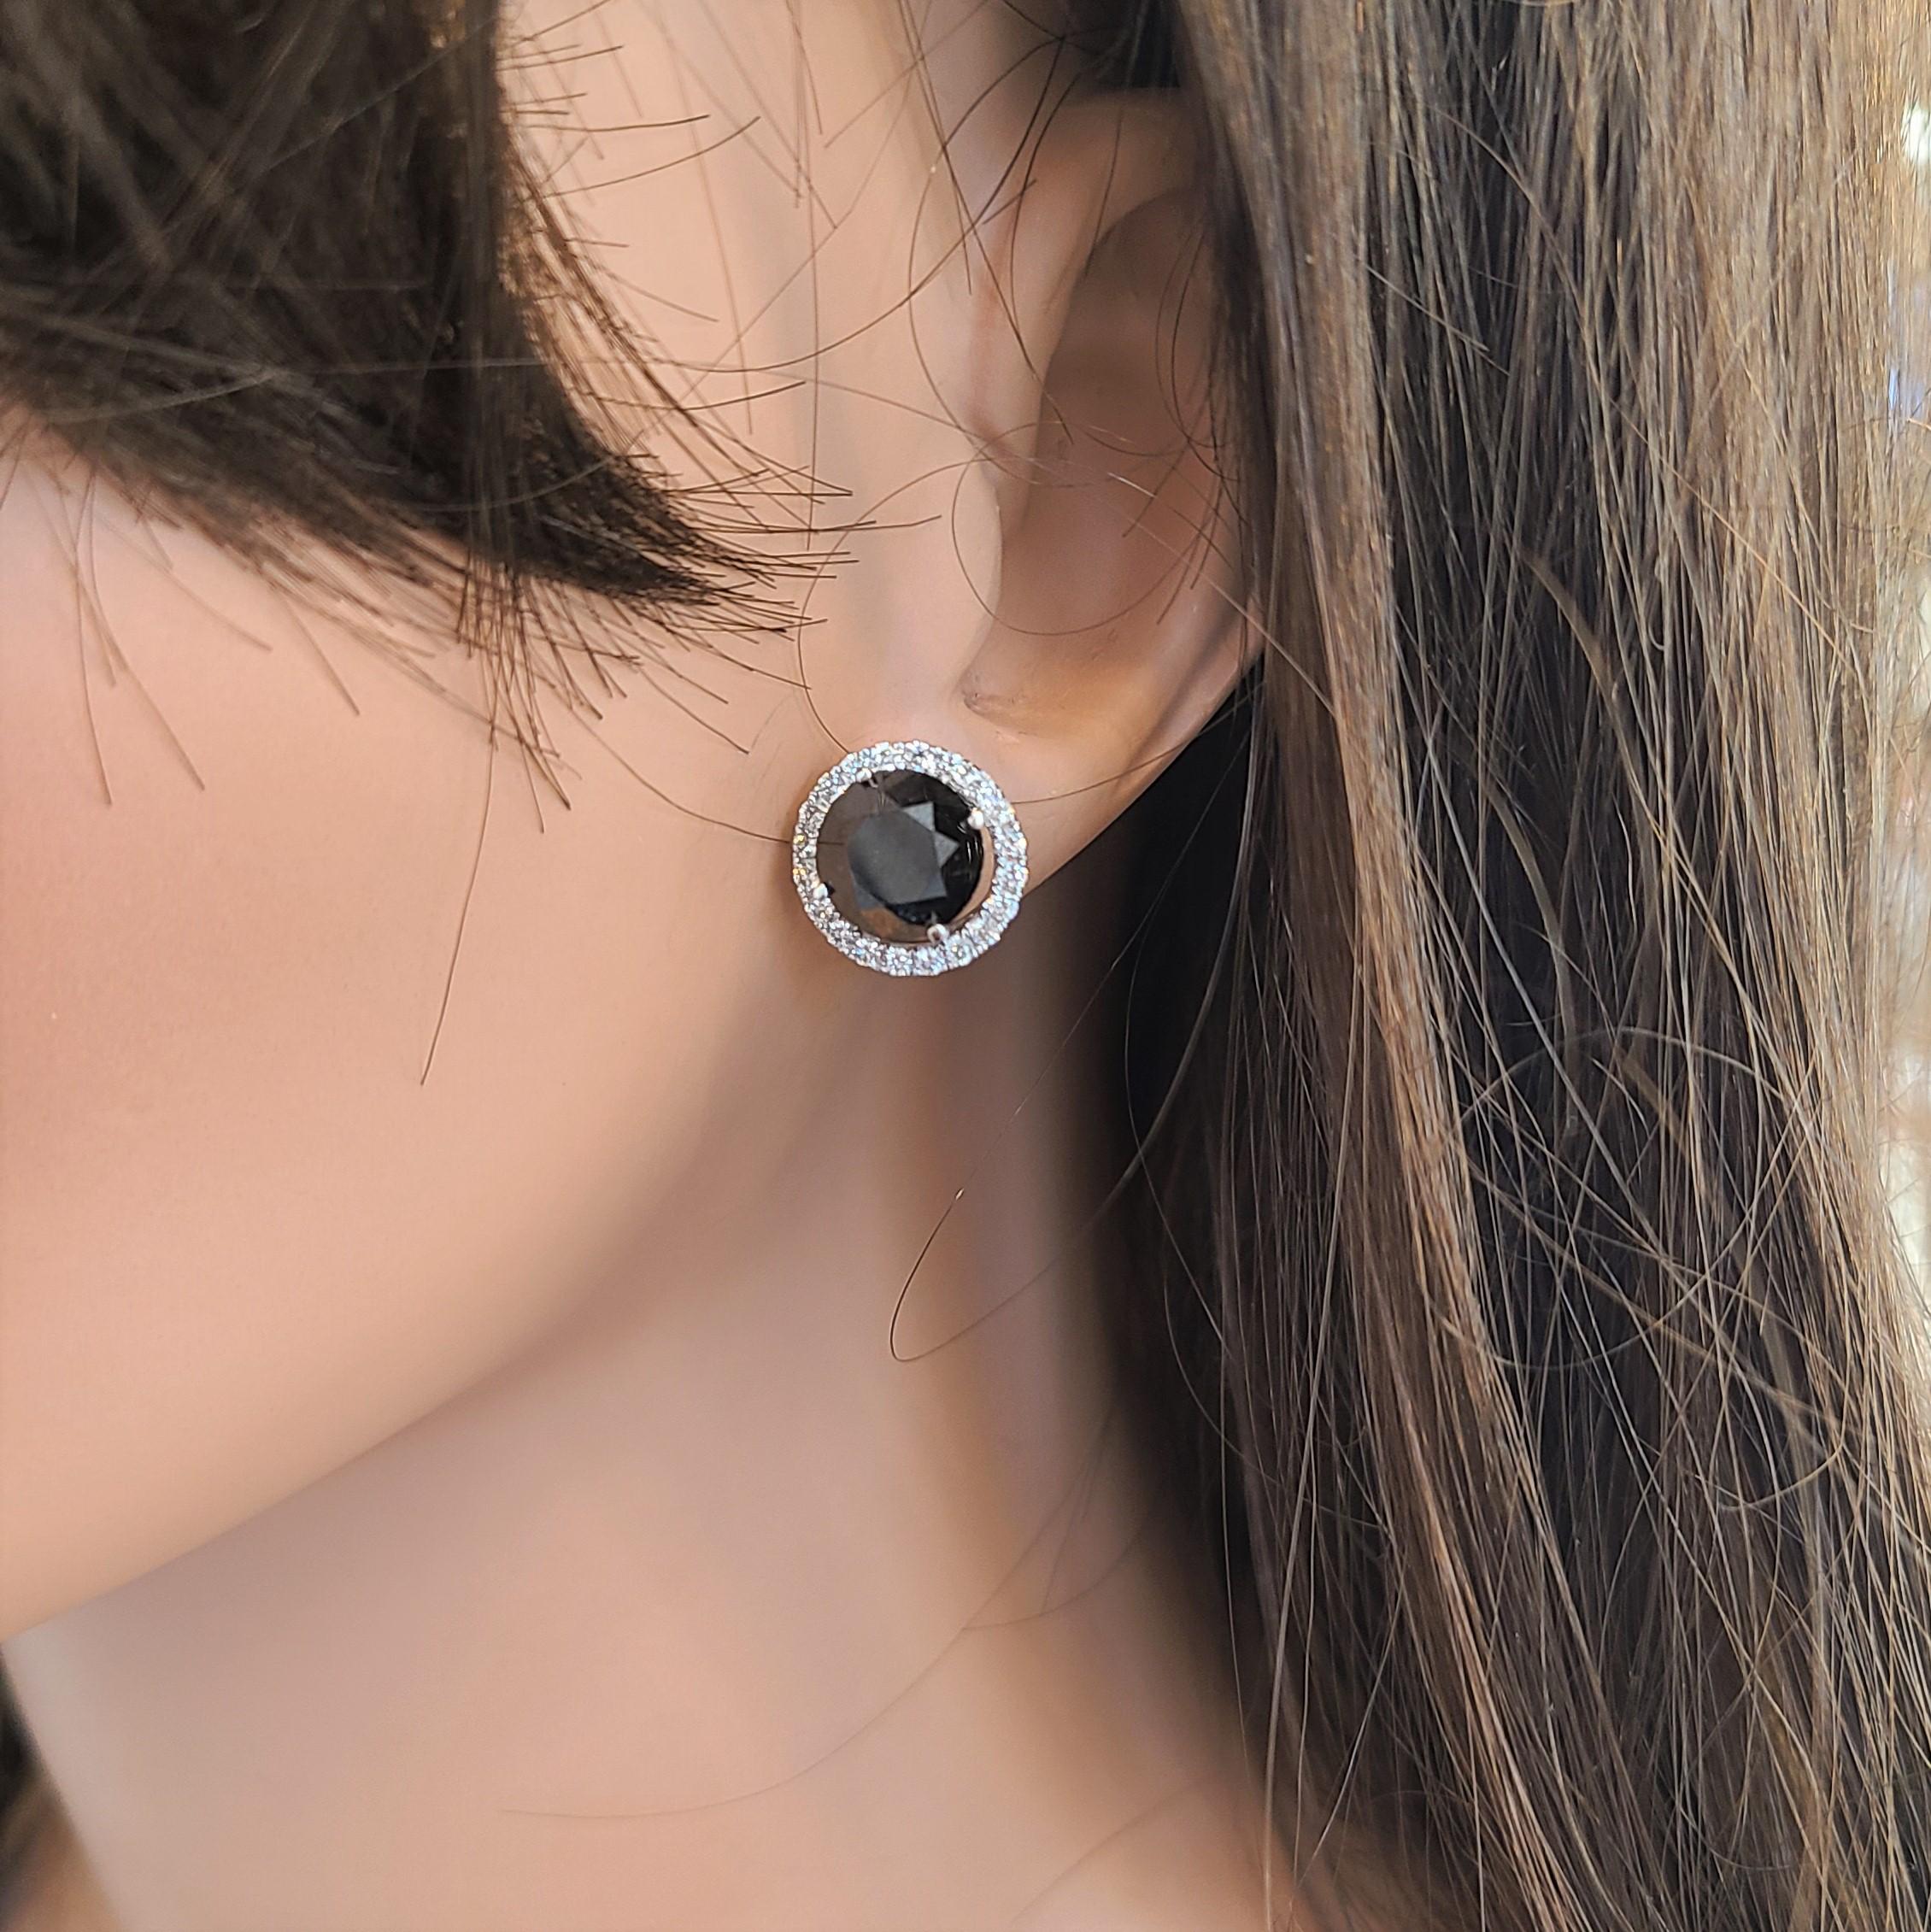 Round Cut 7.39 Carat Total Black Diamond Stud Earrings with Jackets in 14 Karat White Gold